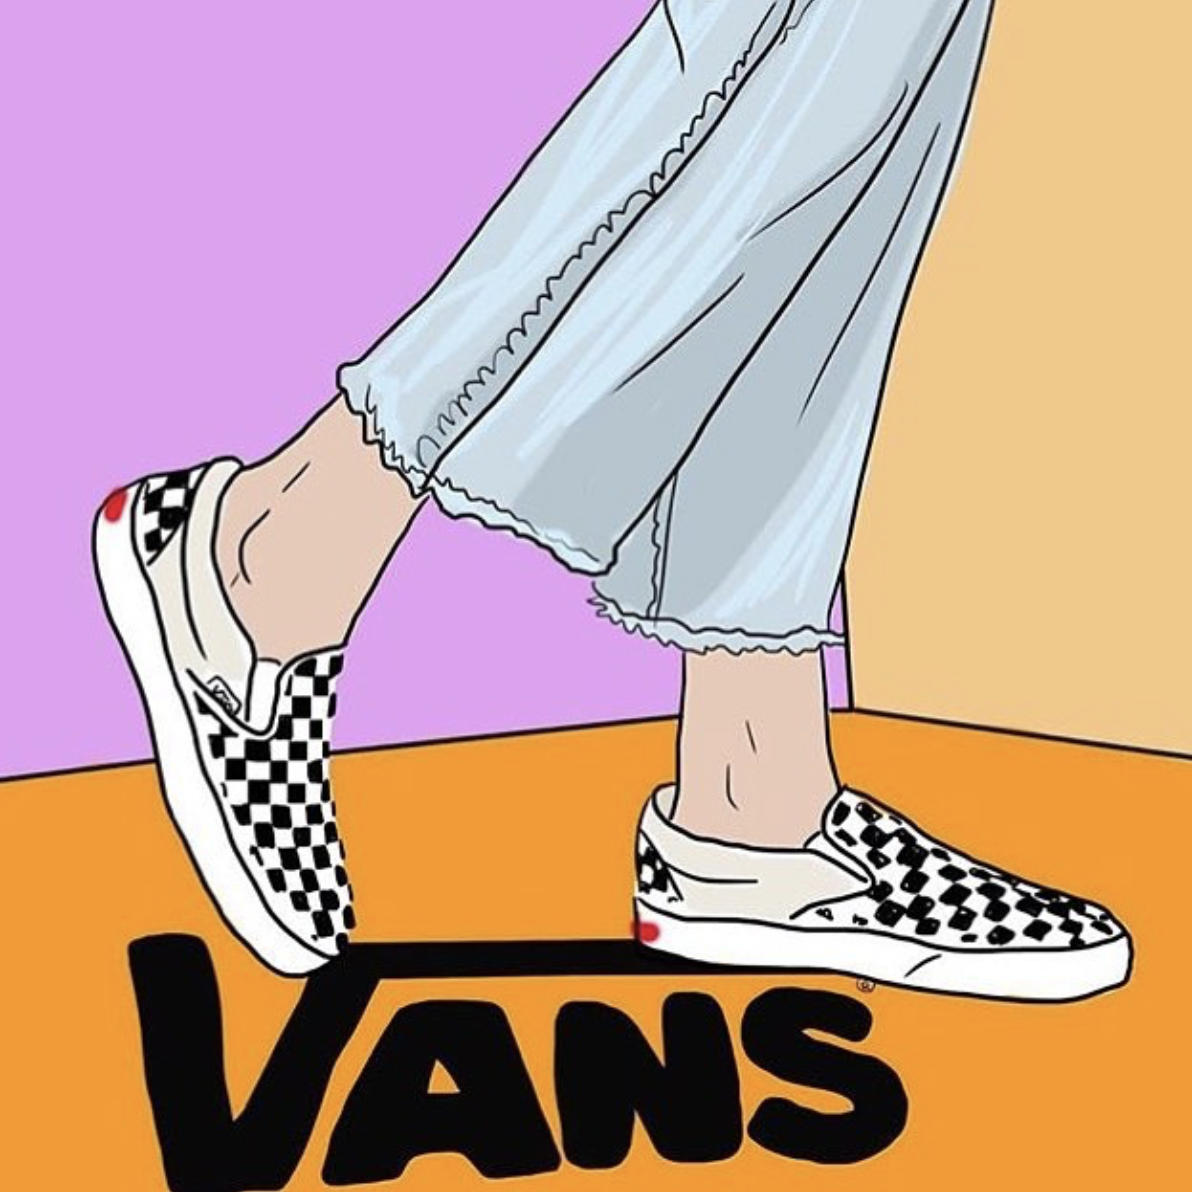 Your weekly art fix by Steph Dalley. Van drawing, Sneakers illustration, Vans off the wall